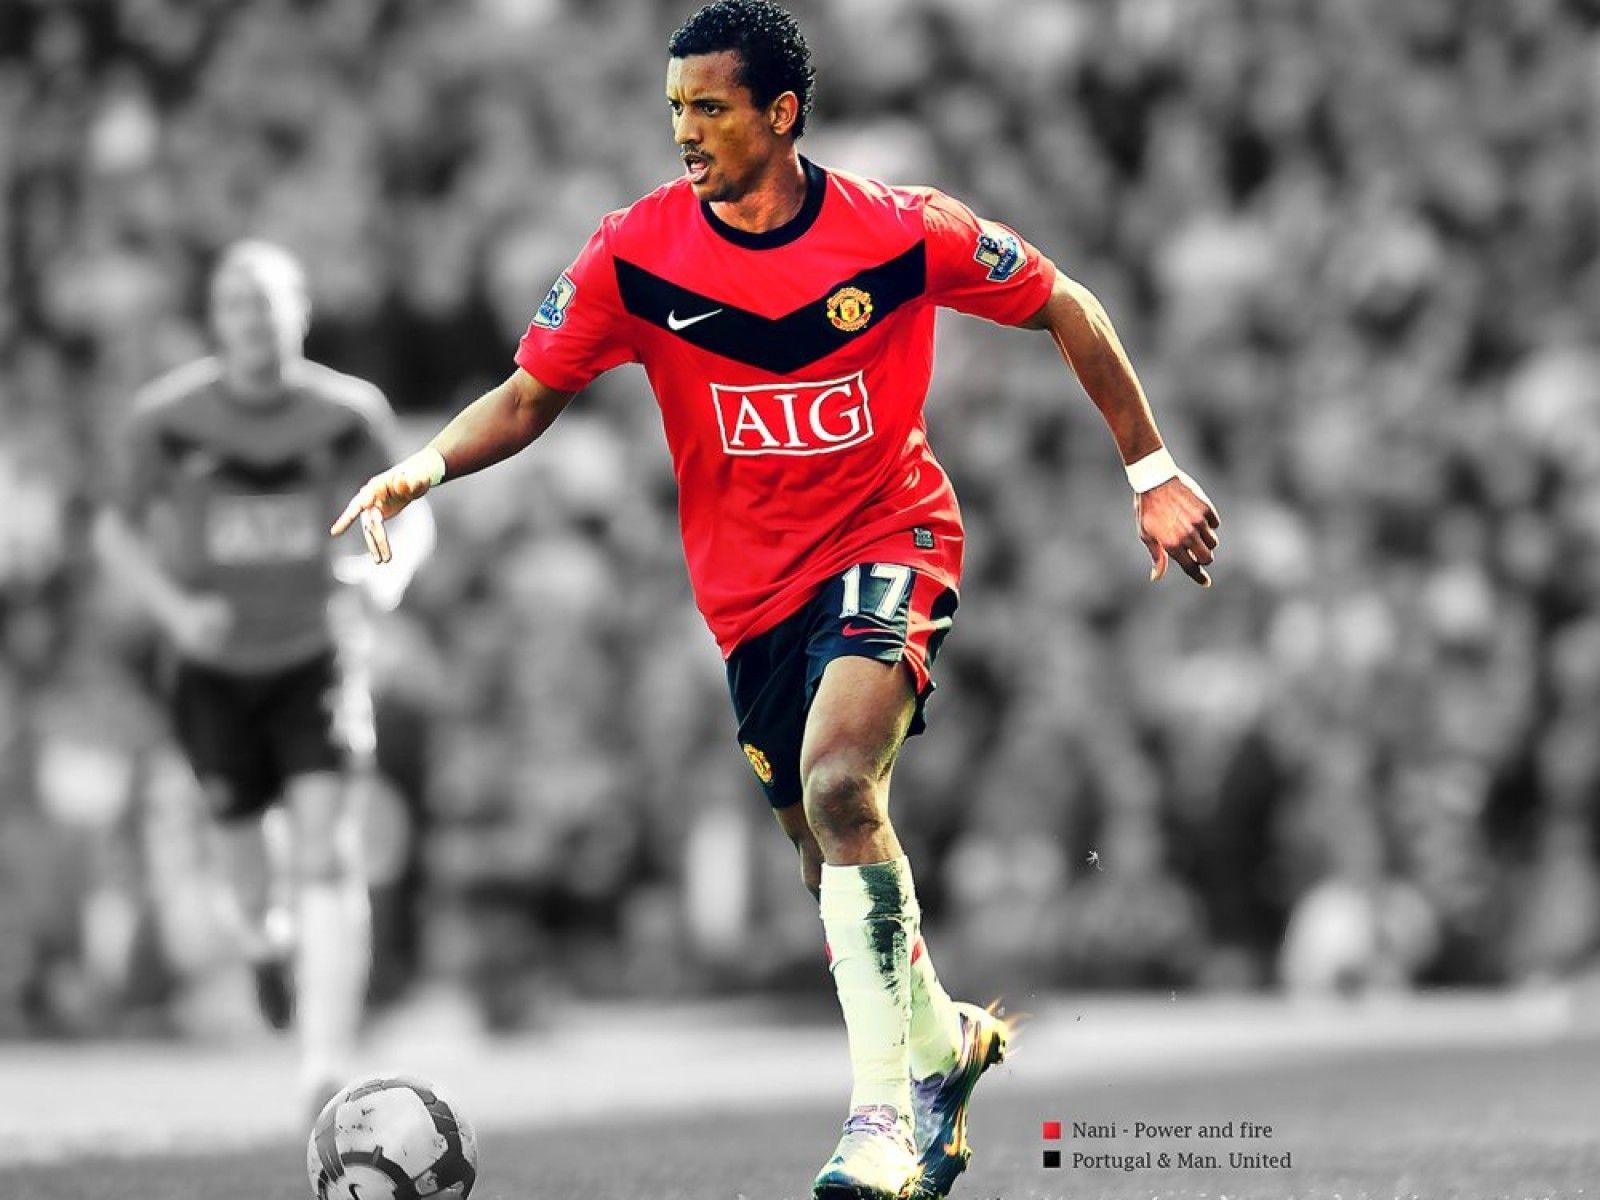 The halfback of Manchester United Luis Nani with a ball wallpaper